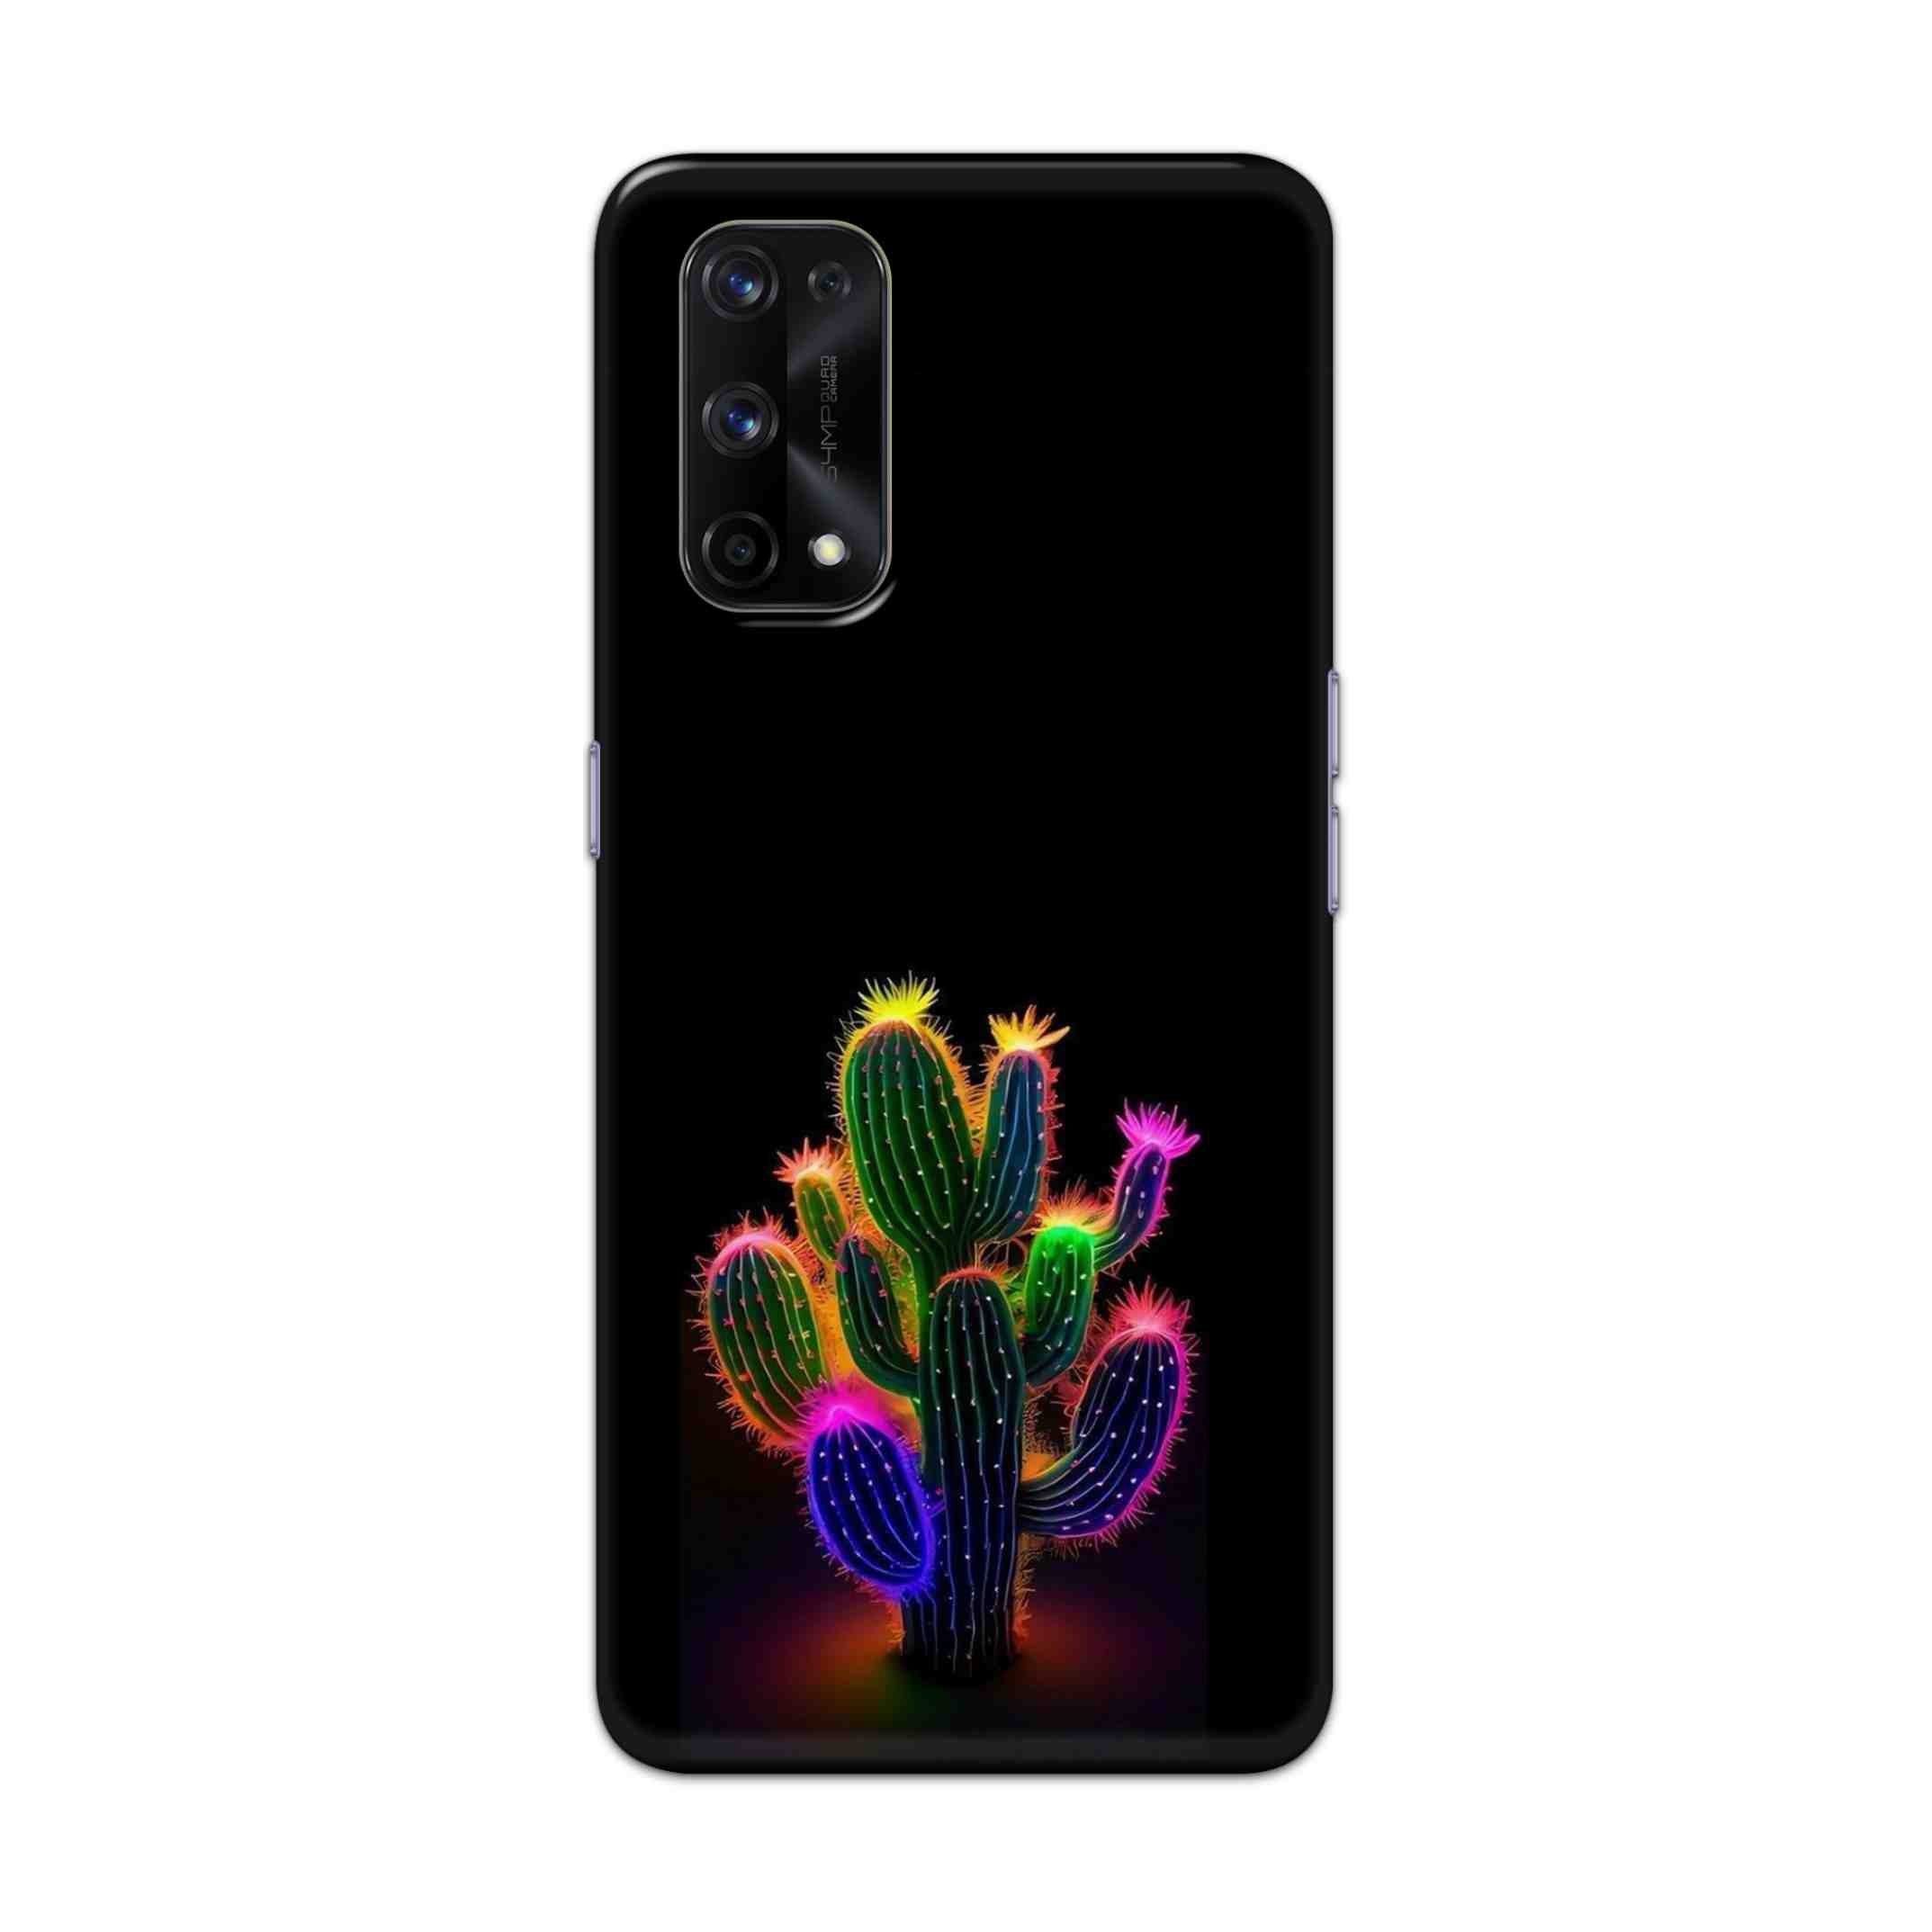 Buy Neon Flower Hard Back Mobile Phone Case Cover For Realme X7 Pro Online